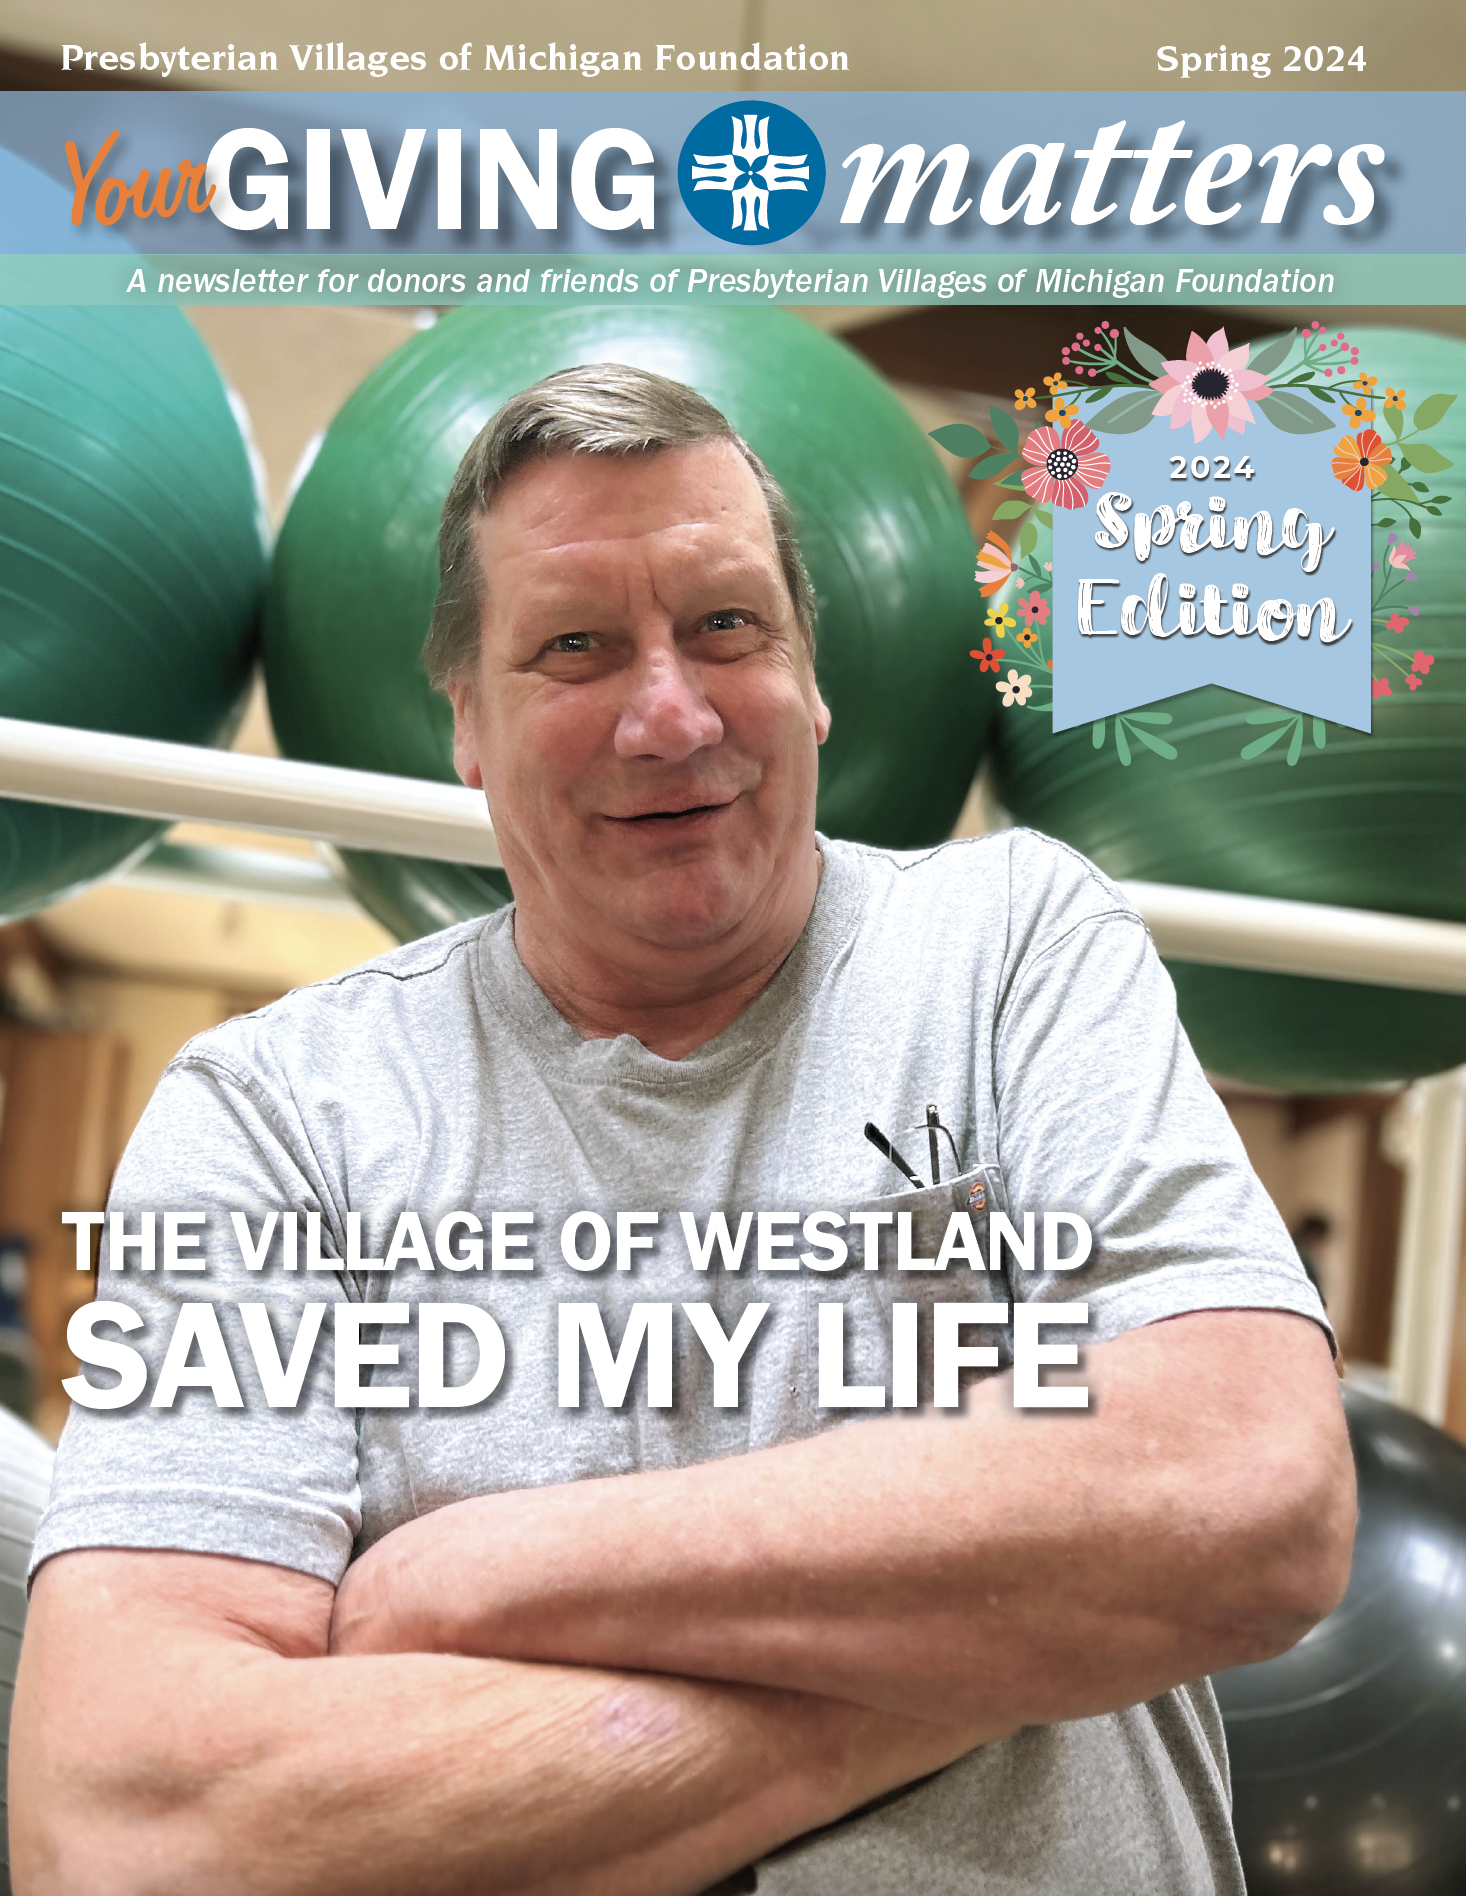 The cover of Your Giving Matters Spring 2024, featuring Mike of the village of Westland.